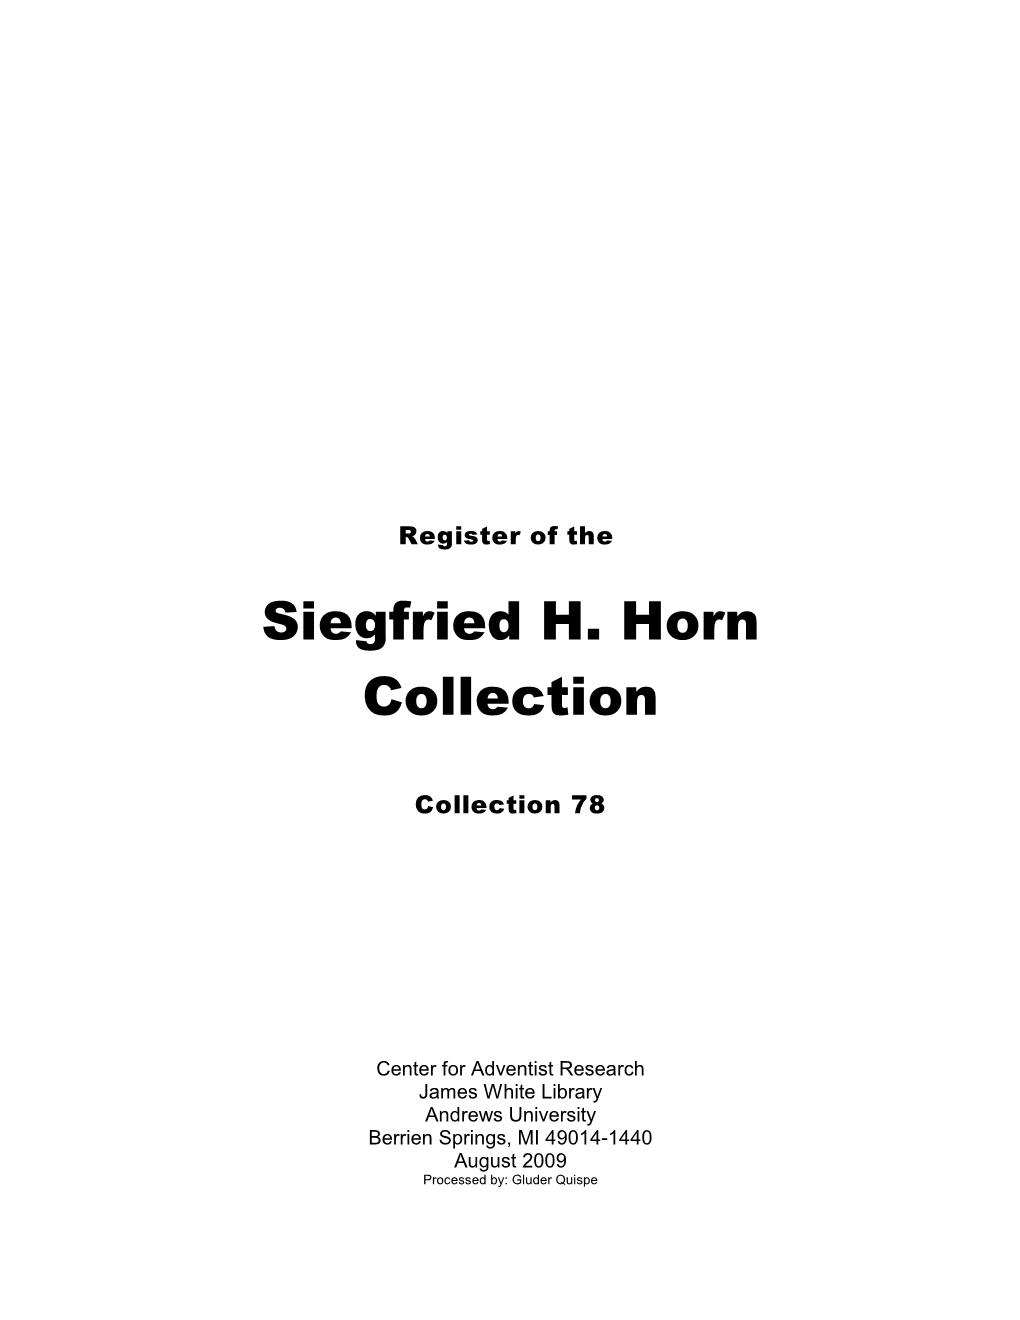 Siegfried H. Horn Collection